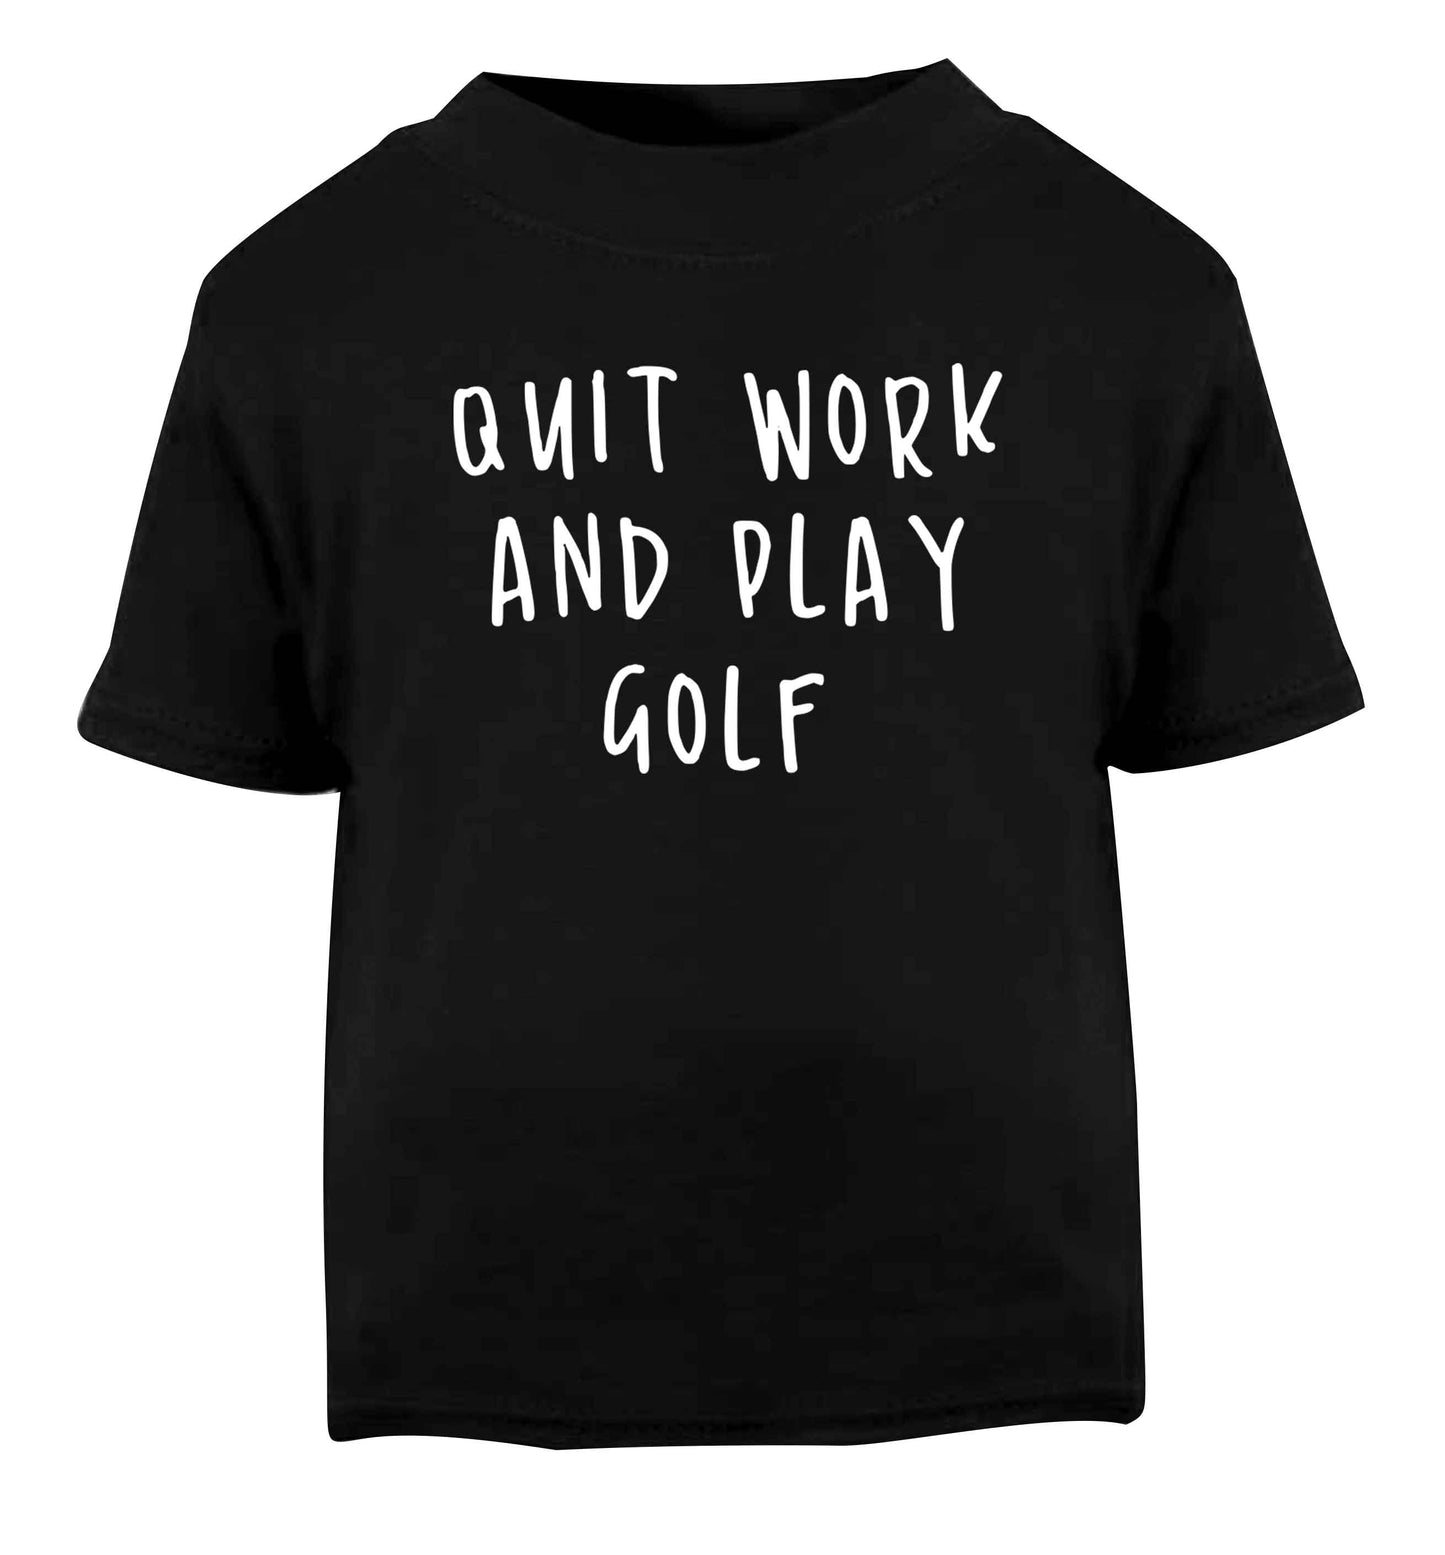 Quit work and play golf Black Baby Toddler Tshirt 2 years